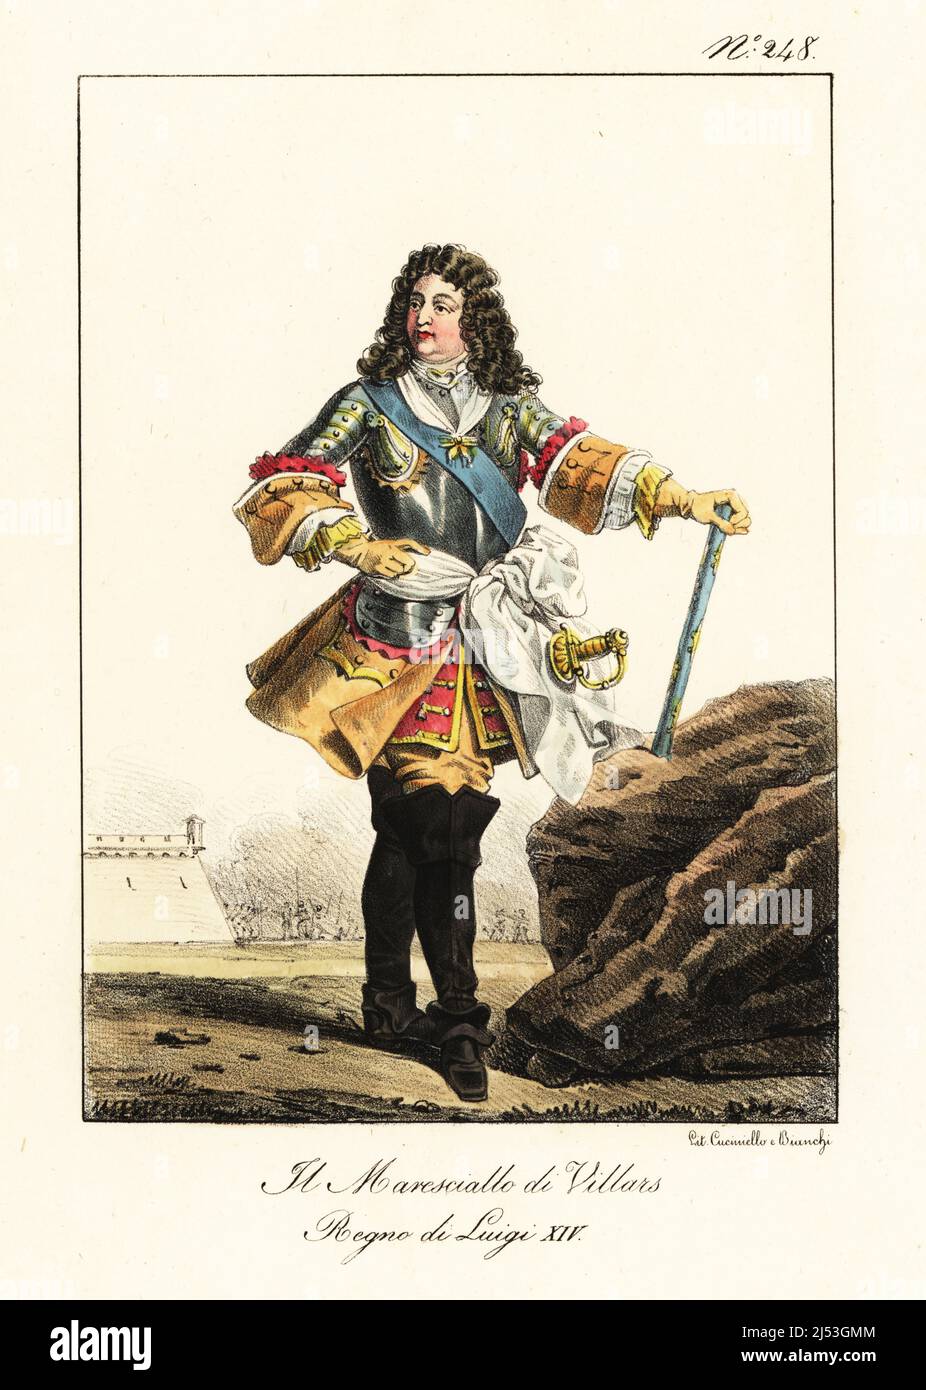 Claude Louis Hector de Villars, Prince de Martigues, Duc de Villars, Vicomte de Melun, 1653-1734, French military commander to King Louis XIV of France. In buff coat, red jacket with frogging, breastplate, ribbon with Order of the Golden Fleece, sword and baton. Le Marechal de Villars. Regne de Louis XIV. Handcoloured lithograph by Lorenzo Bianchi and Domenico Cuciniello after Hippolyte Lecomte from Costumi civili e militari della monarchia francese dal 1200 al 1820, Naples, 1825. Italian edition of Lecomte’s Civilian and military costumes of the French monarchy from 1200 to 1820. Stock Photo